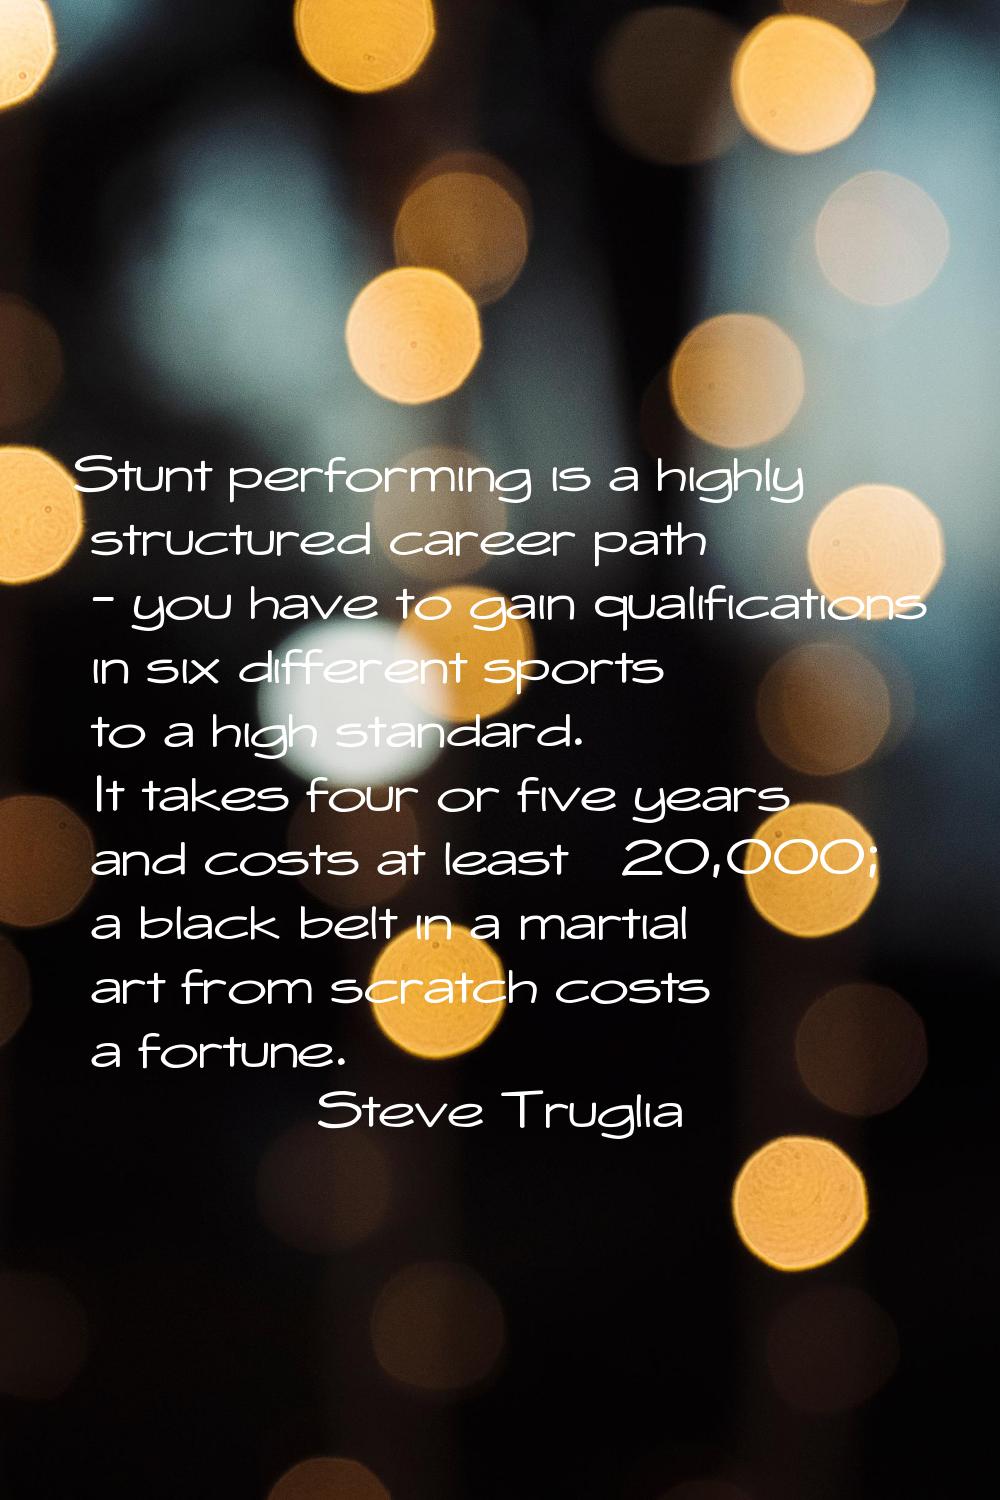 Stunt performing is a highly structured career path - you have to gain qualifications in six differ